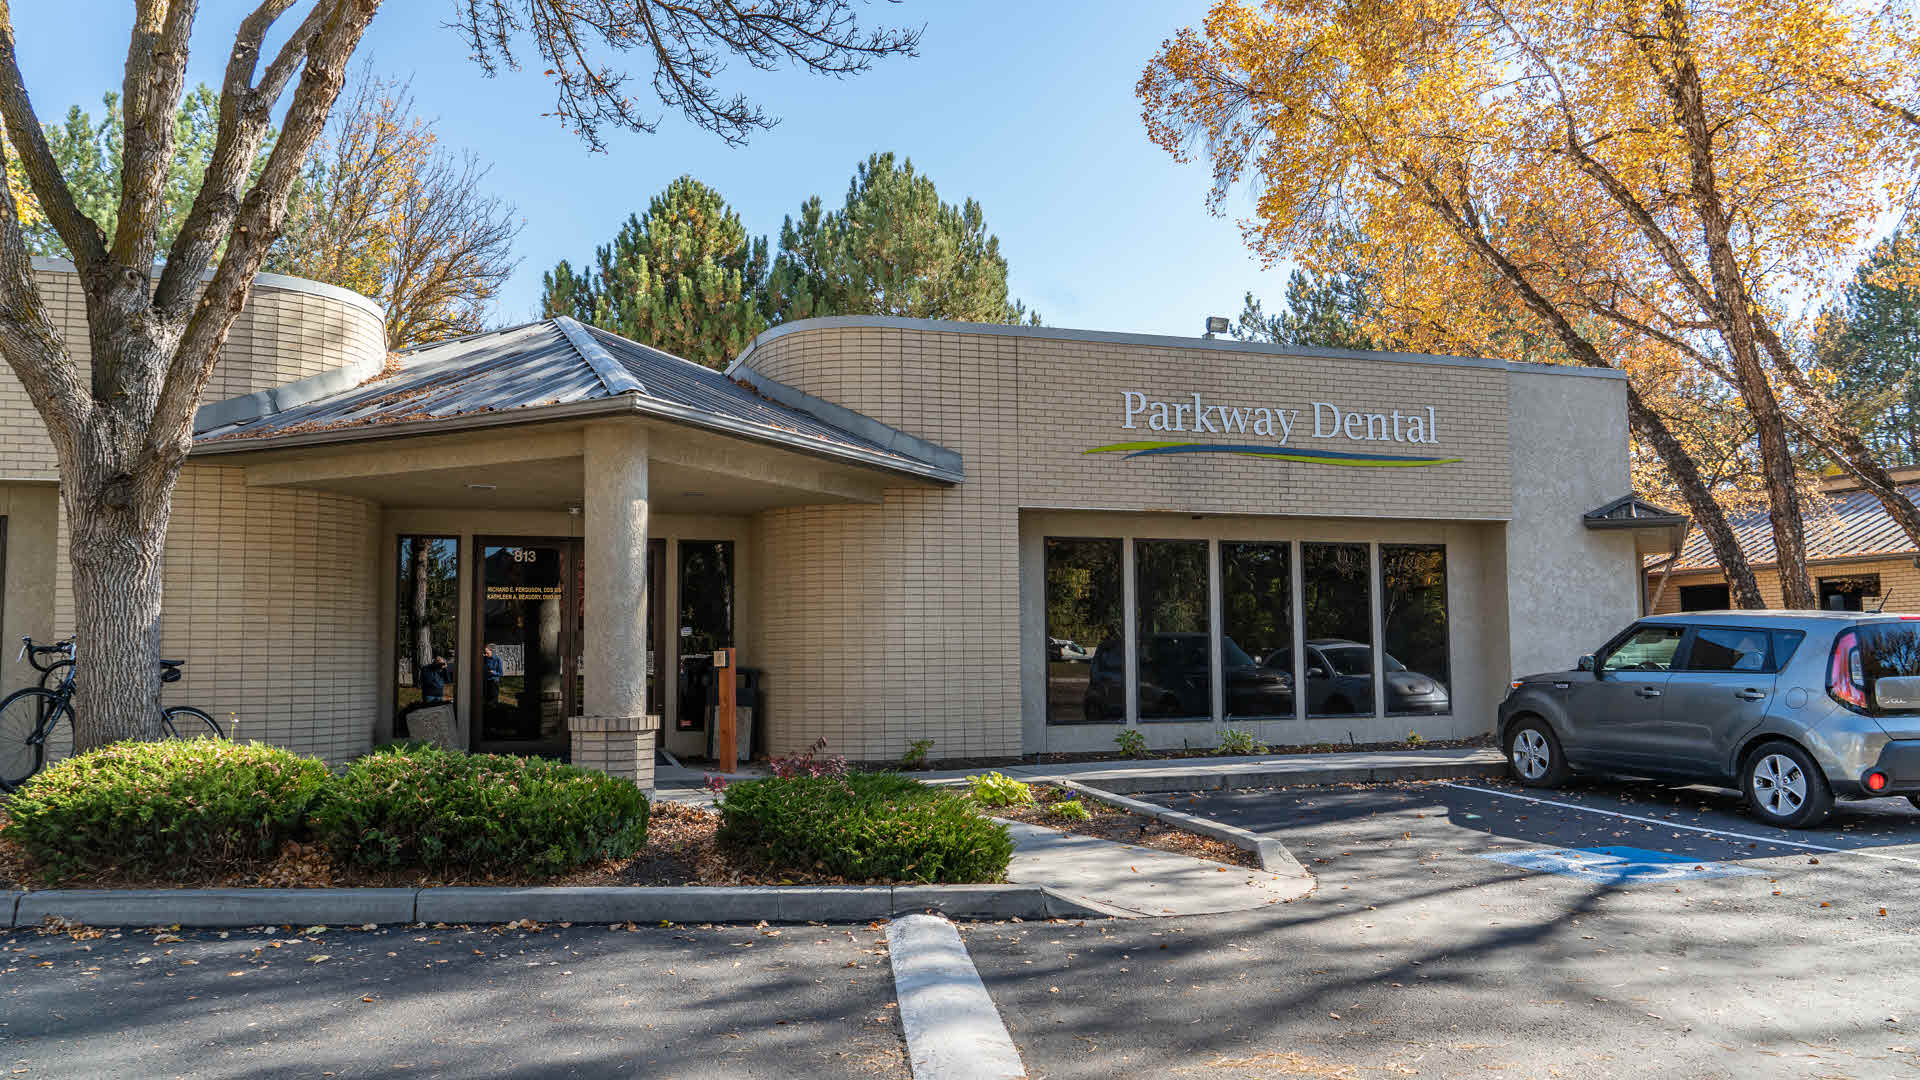 Our dentists serve you at three convenient office locations throughout Boise and Eagle.